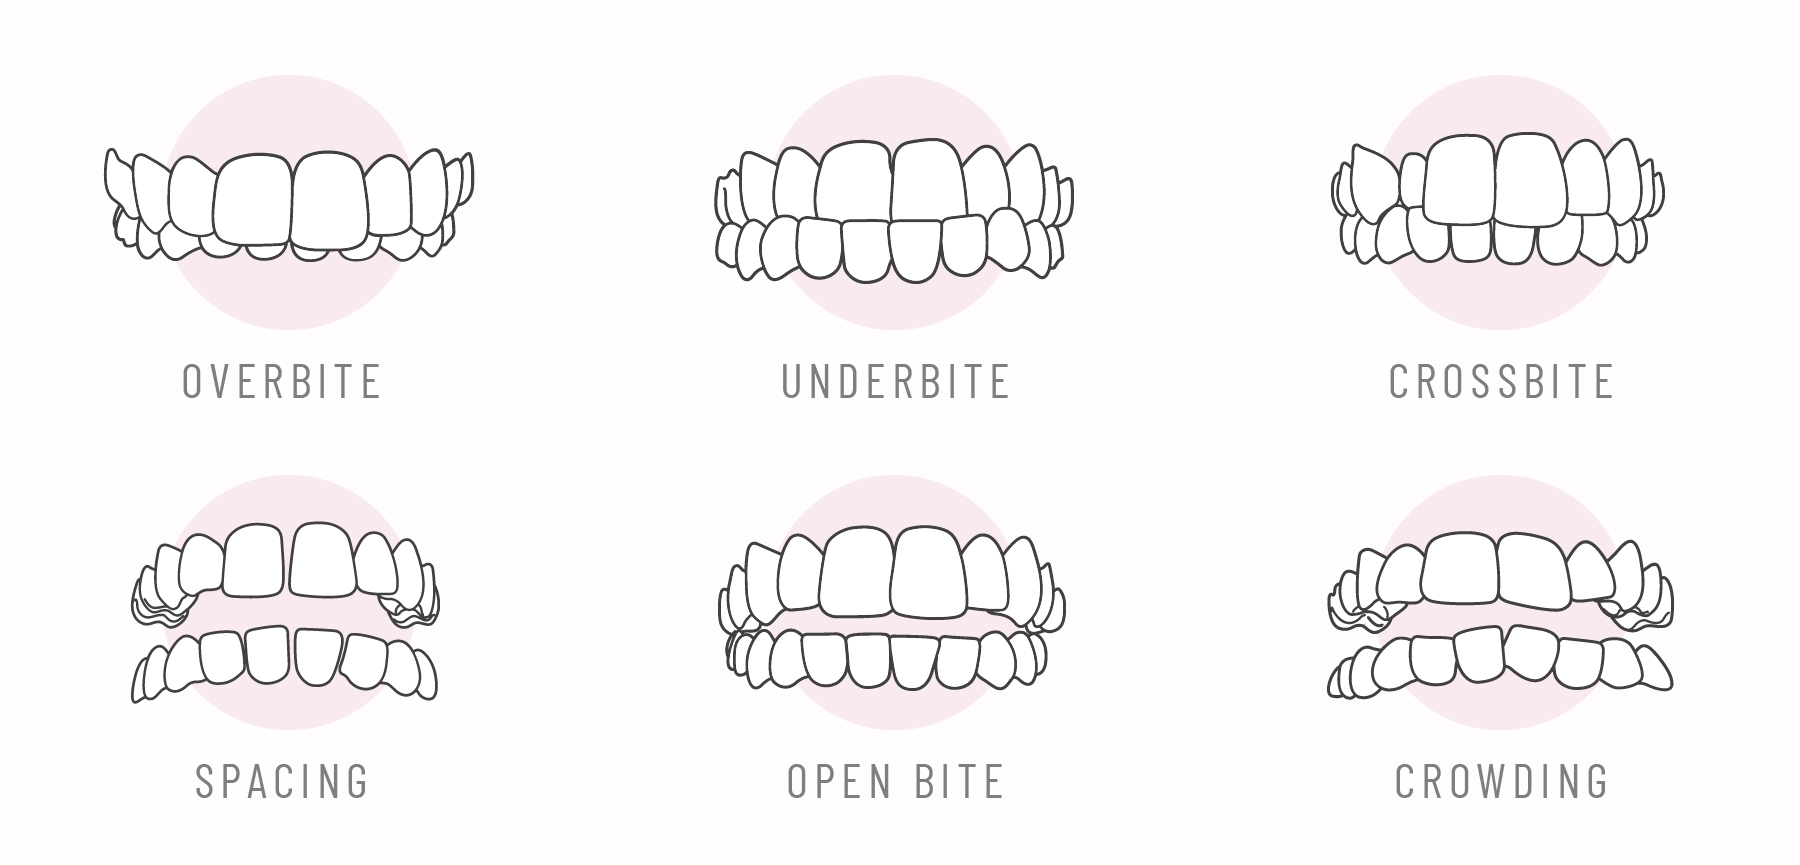 Illustration of various forms of malocclusion: overbite, underbite, crossbite, teeth spacing or gap teeth, open bite, crowding or crooked teeth.